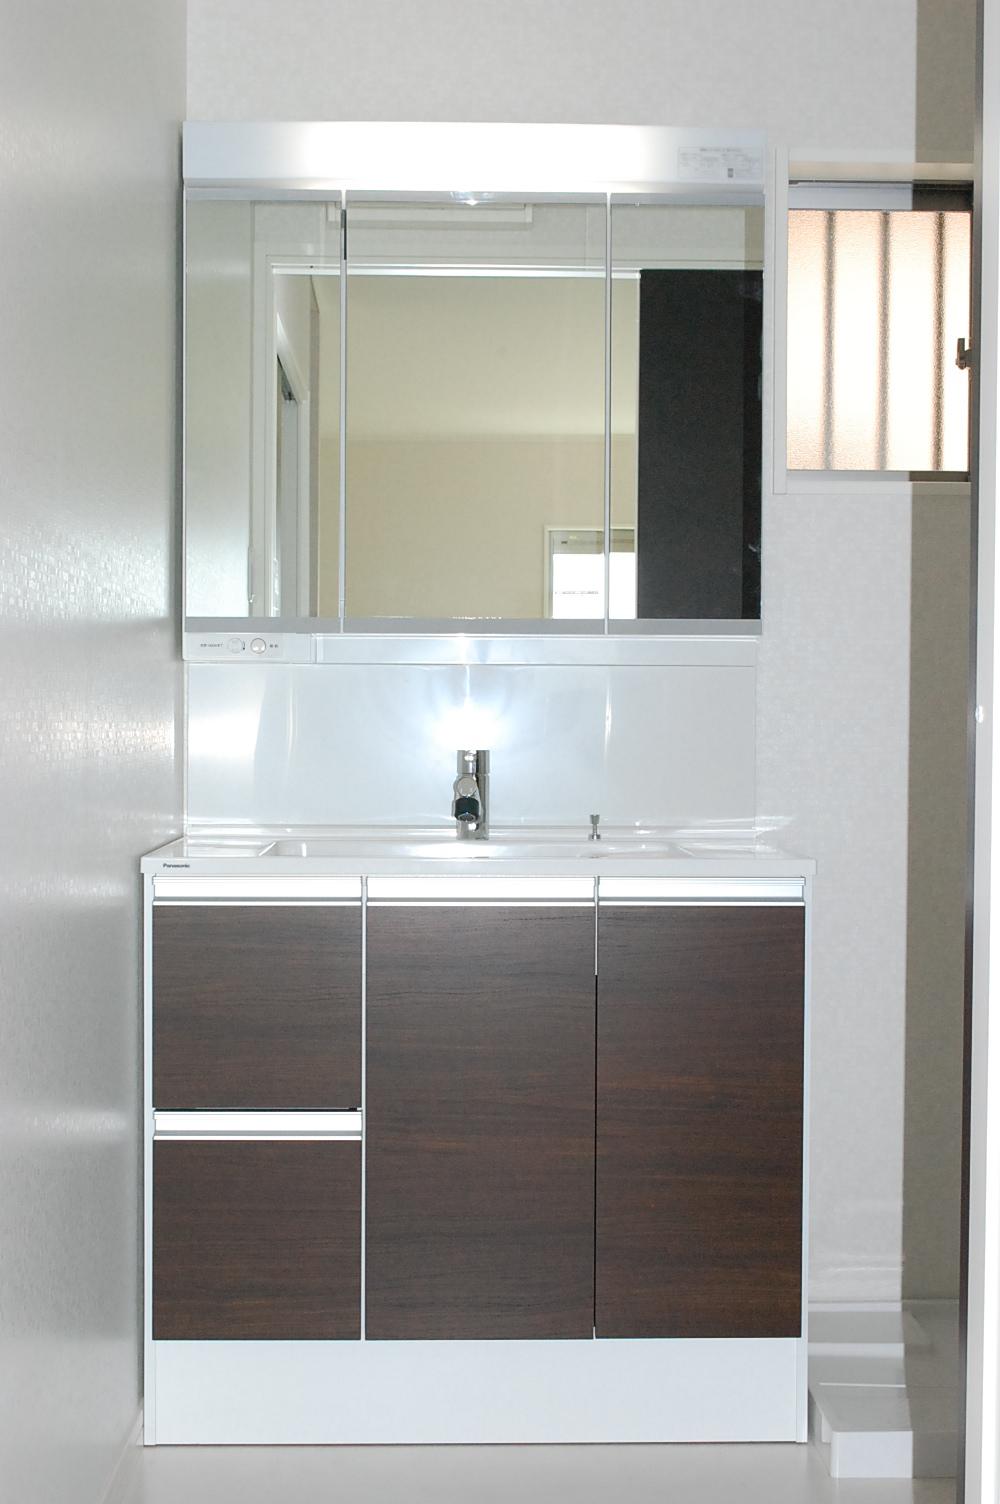 Wash basin, toilet. LIXIL made vanity. Shower Faucets. Wide three-sided mirror.